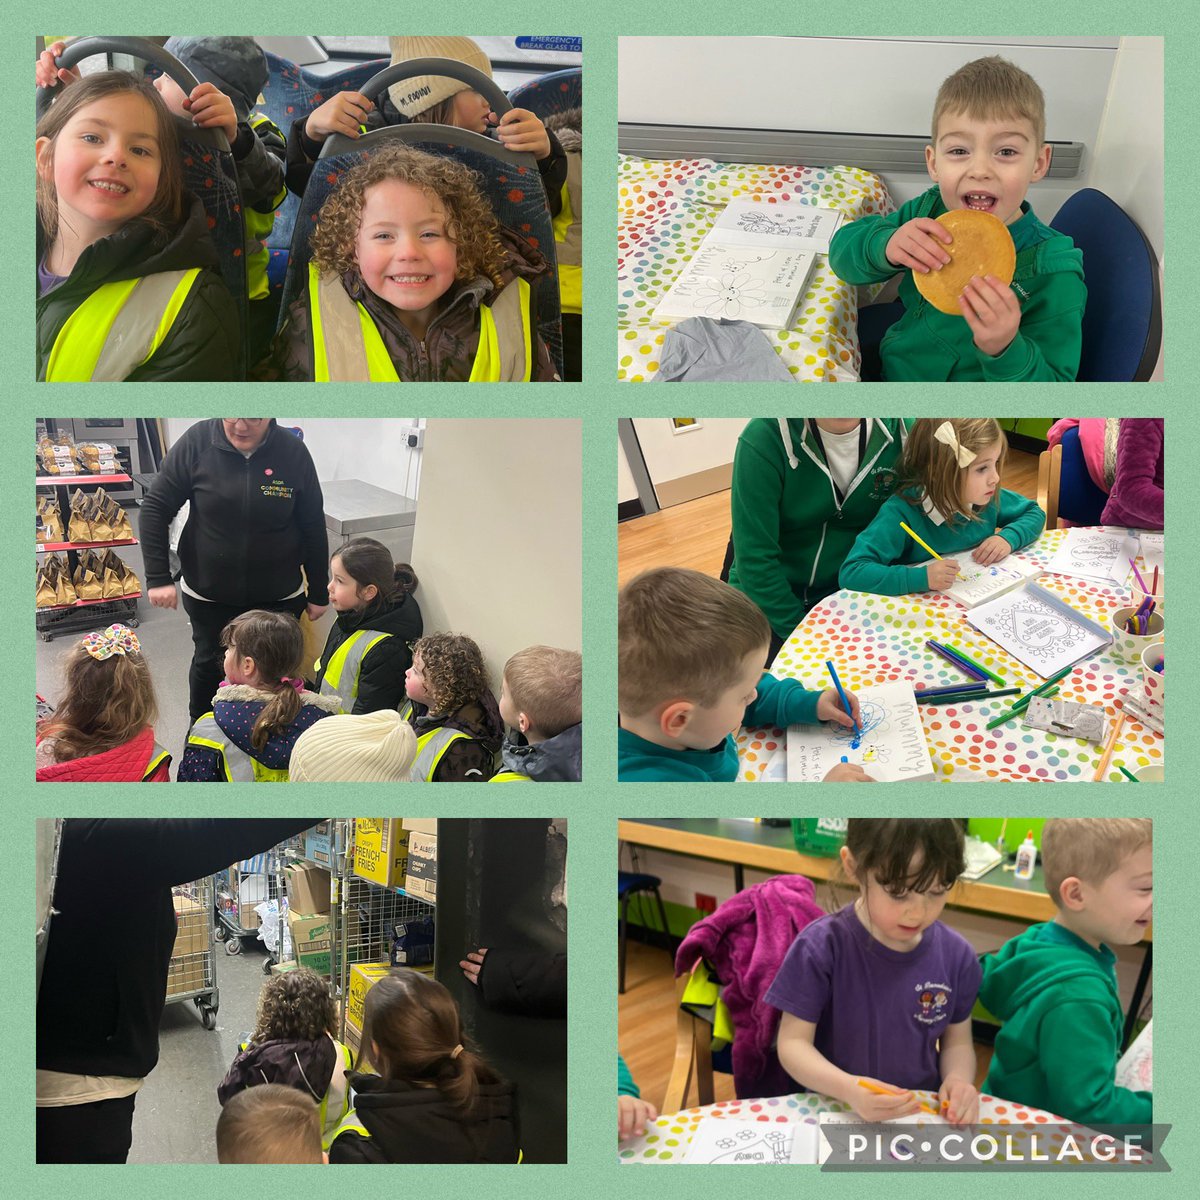 Some of our nursery children went on the local bus to Asda. We had a tour around the store, had a pancake from the bakery then participated in Mother’s Day crafts. They also donated some books to our lending library. Thank you for a great morning 😁 @AsdaStenny @AsdaCommunity